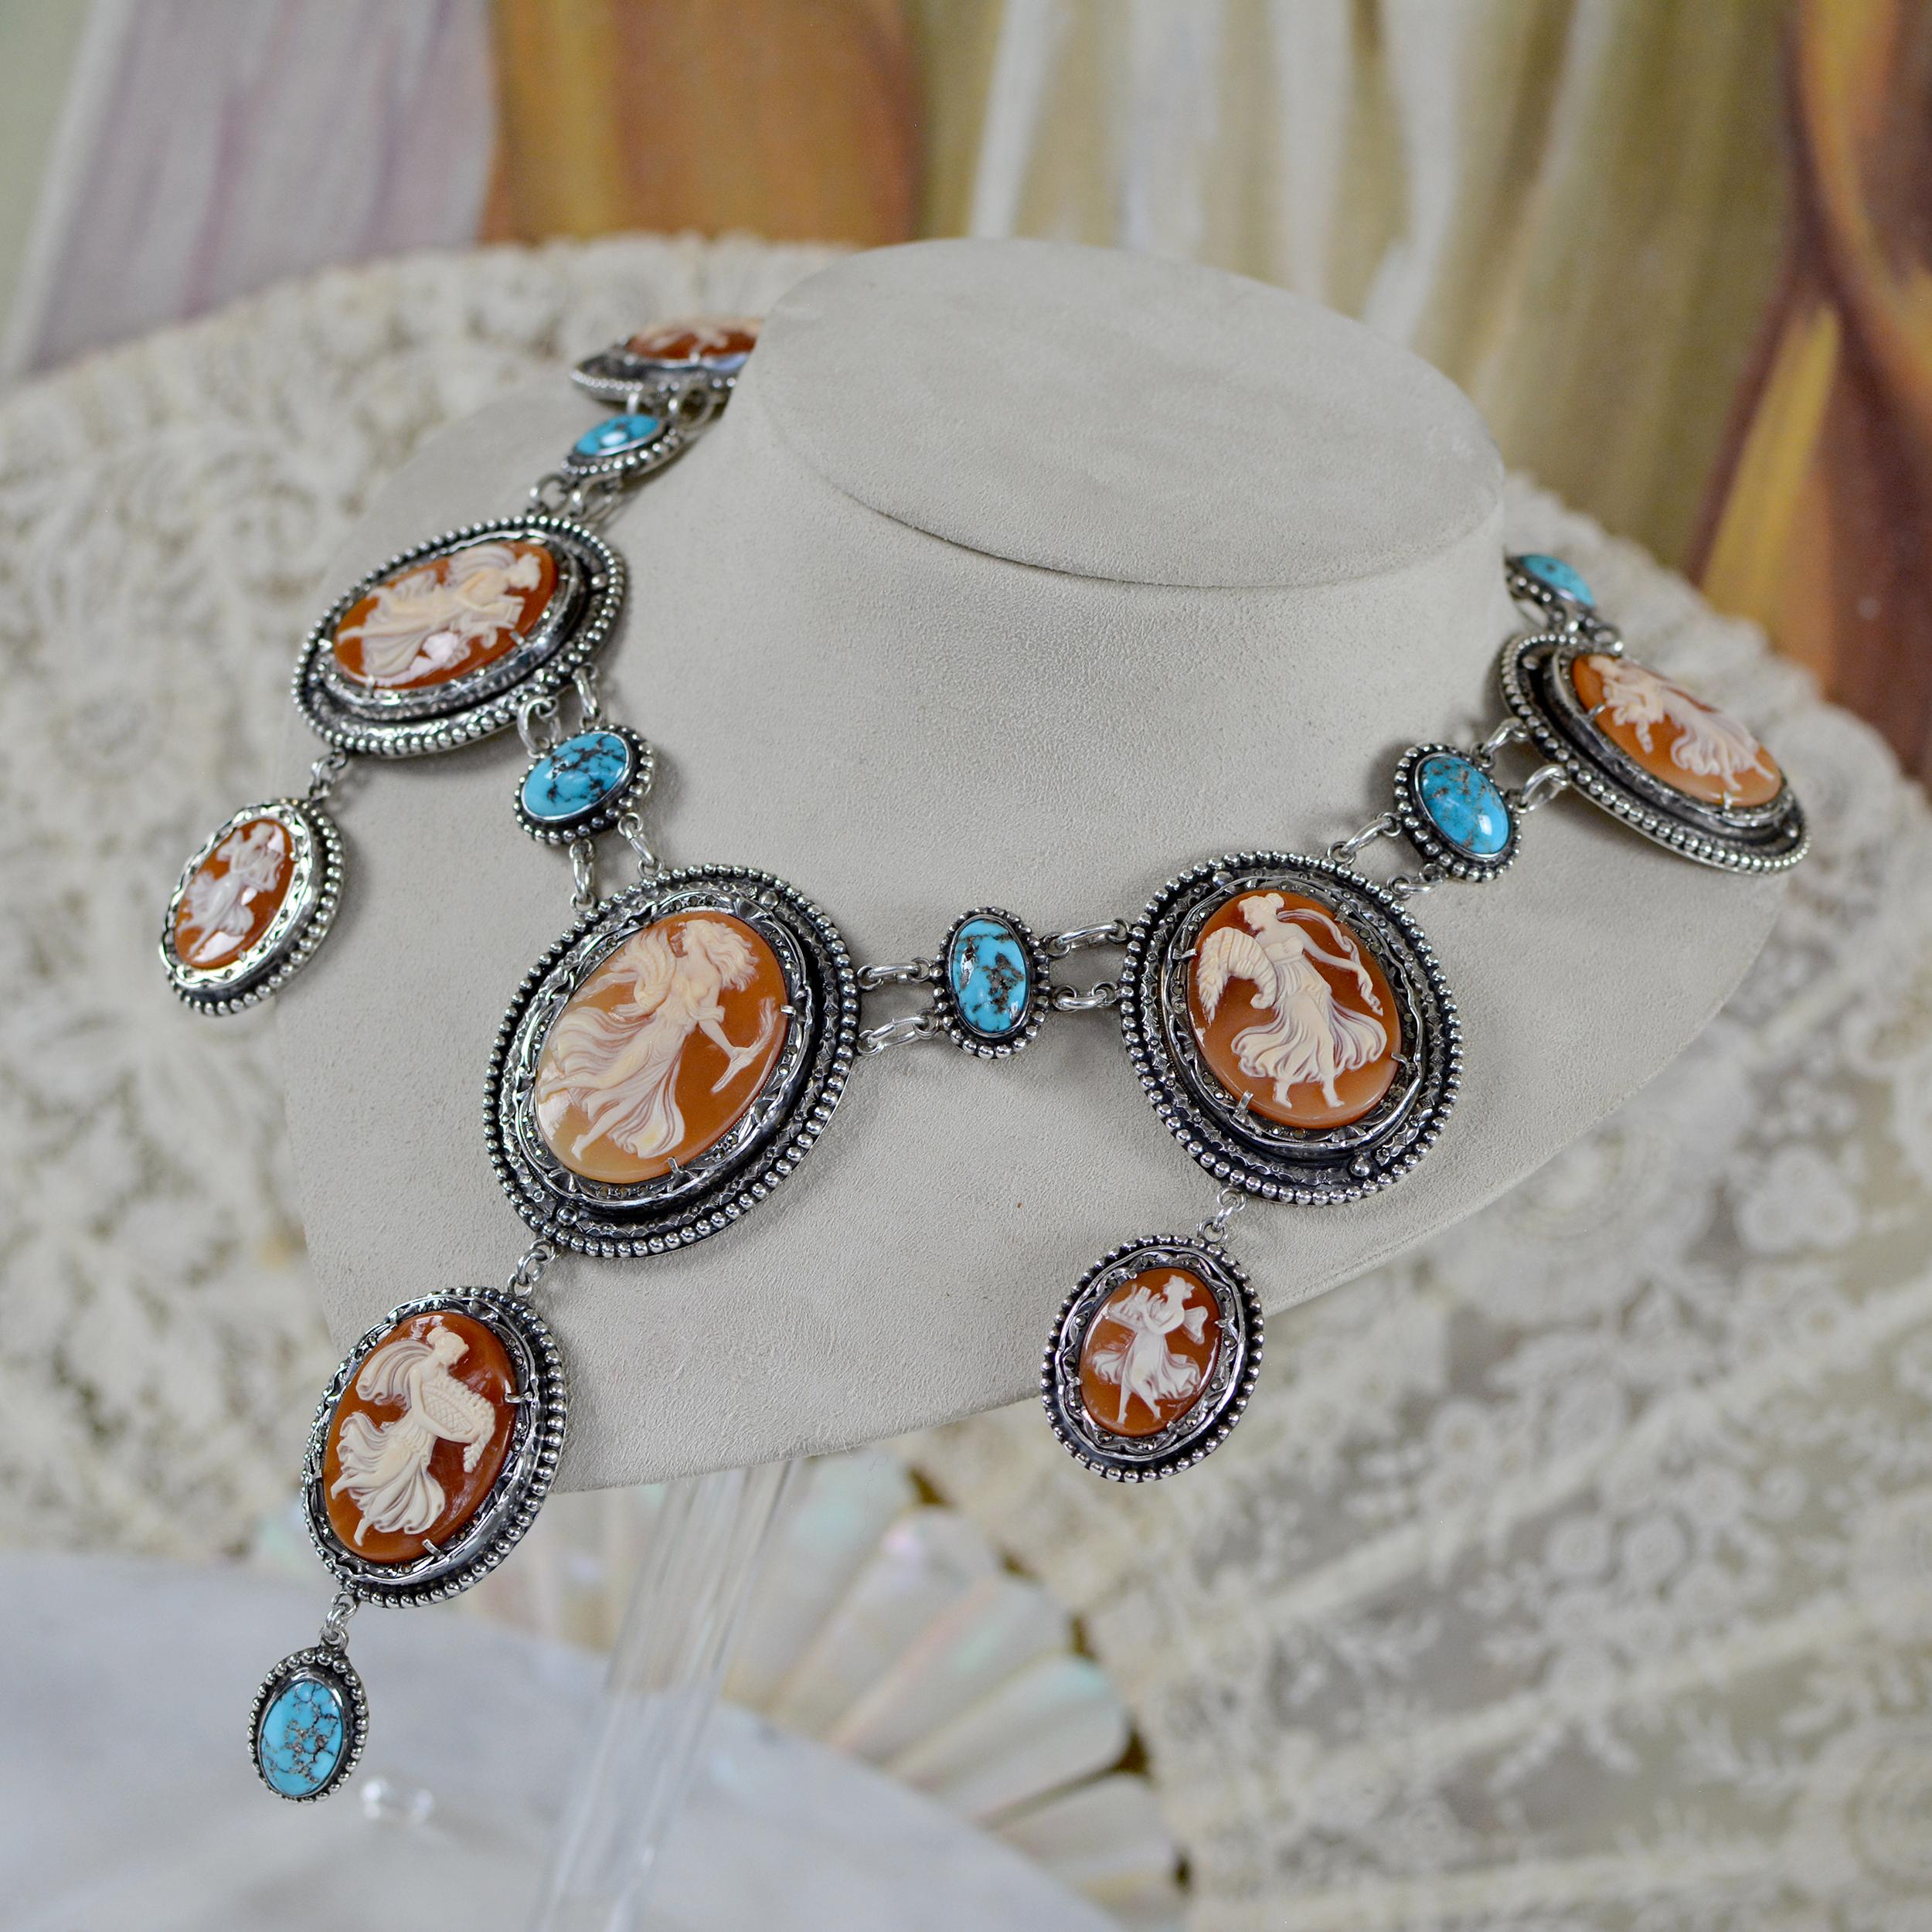 Jill Garber 19th. C. Terpsichore Cameo Suite Necklace with Persian Turquoise  For Sale 3